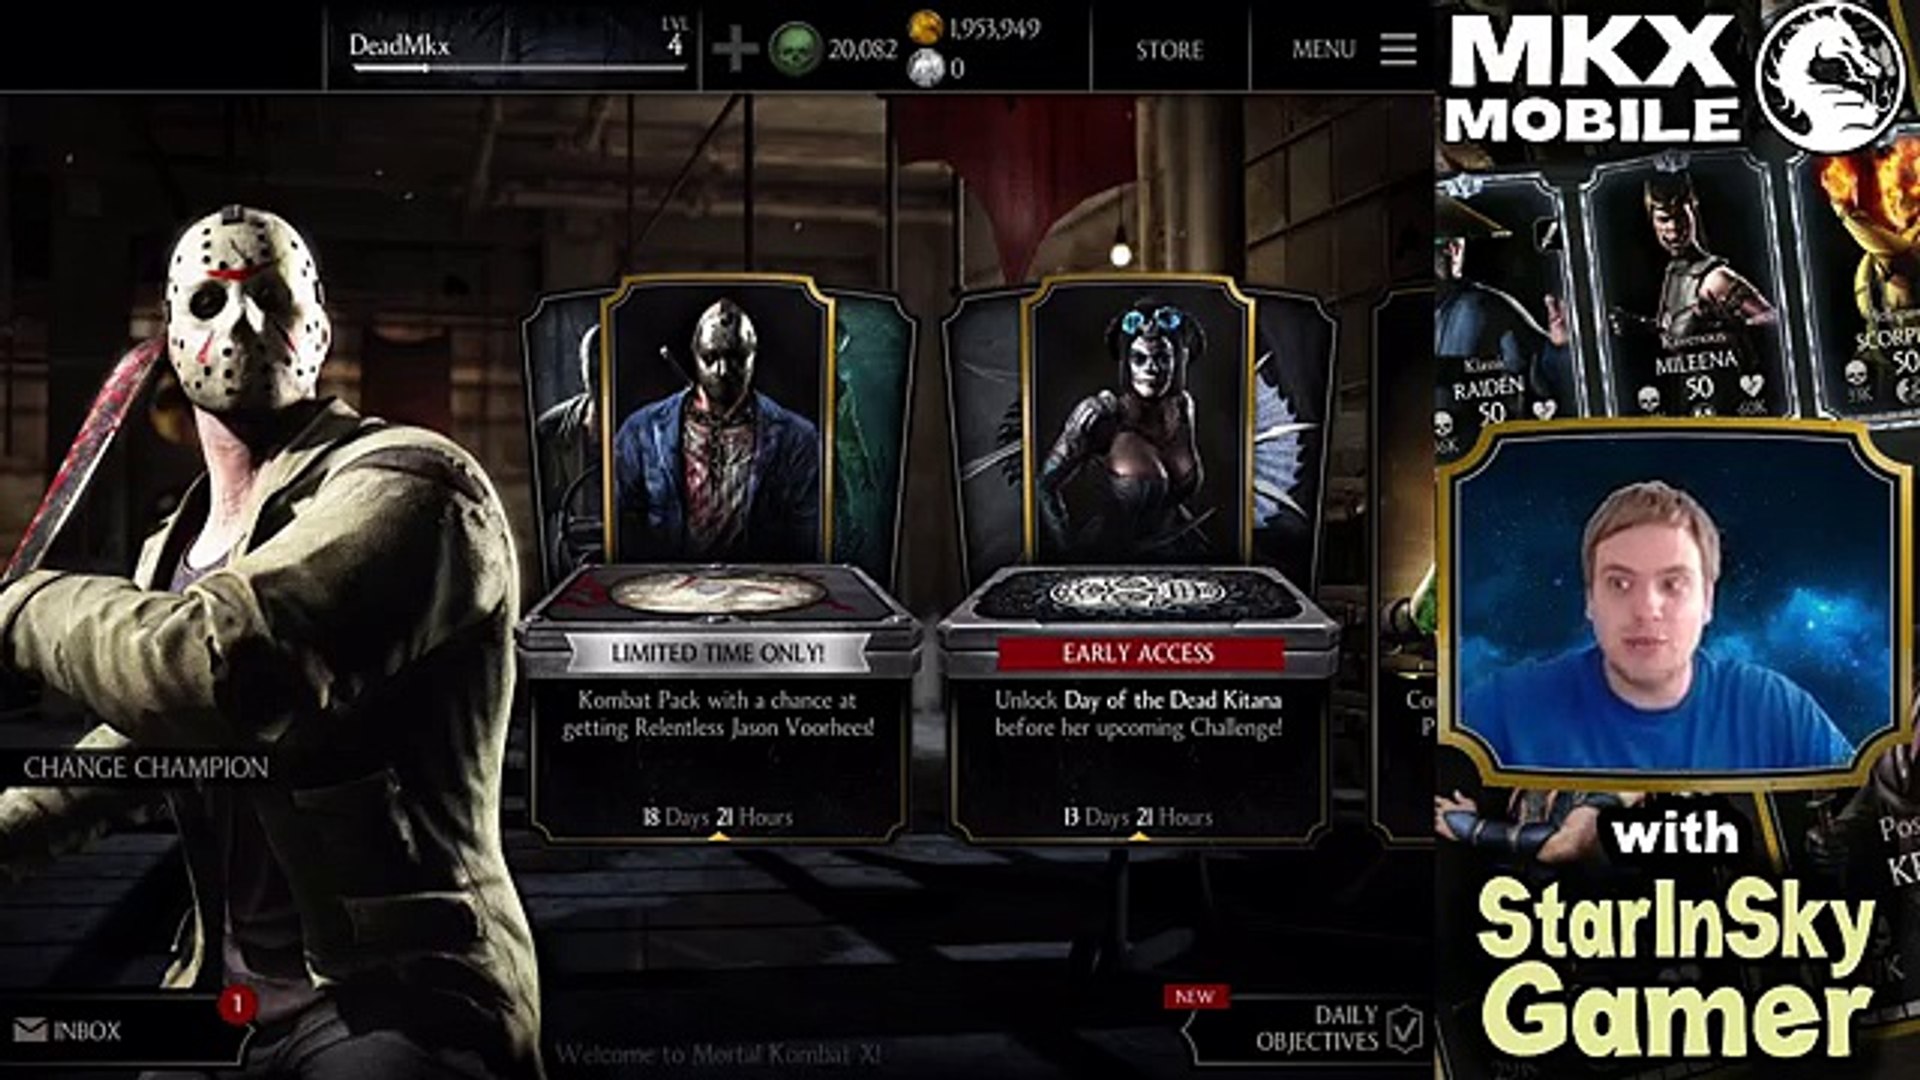 HUGE Relentless Jason Pack opening (MKX Mobile). What are the chances to  get him? - Vidéo Dailymotion